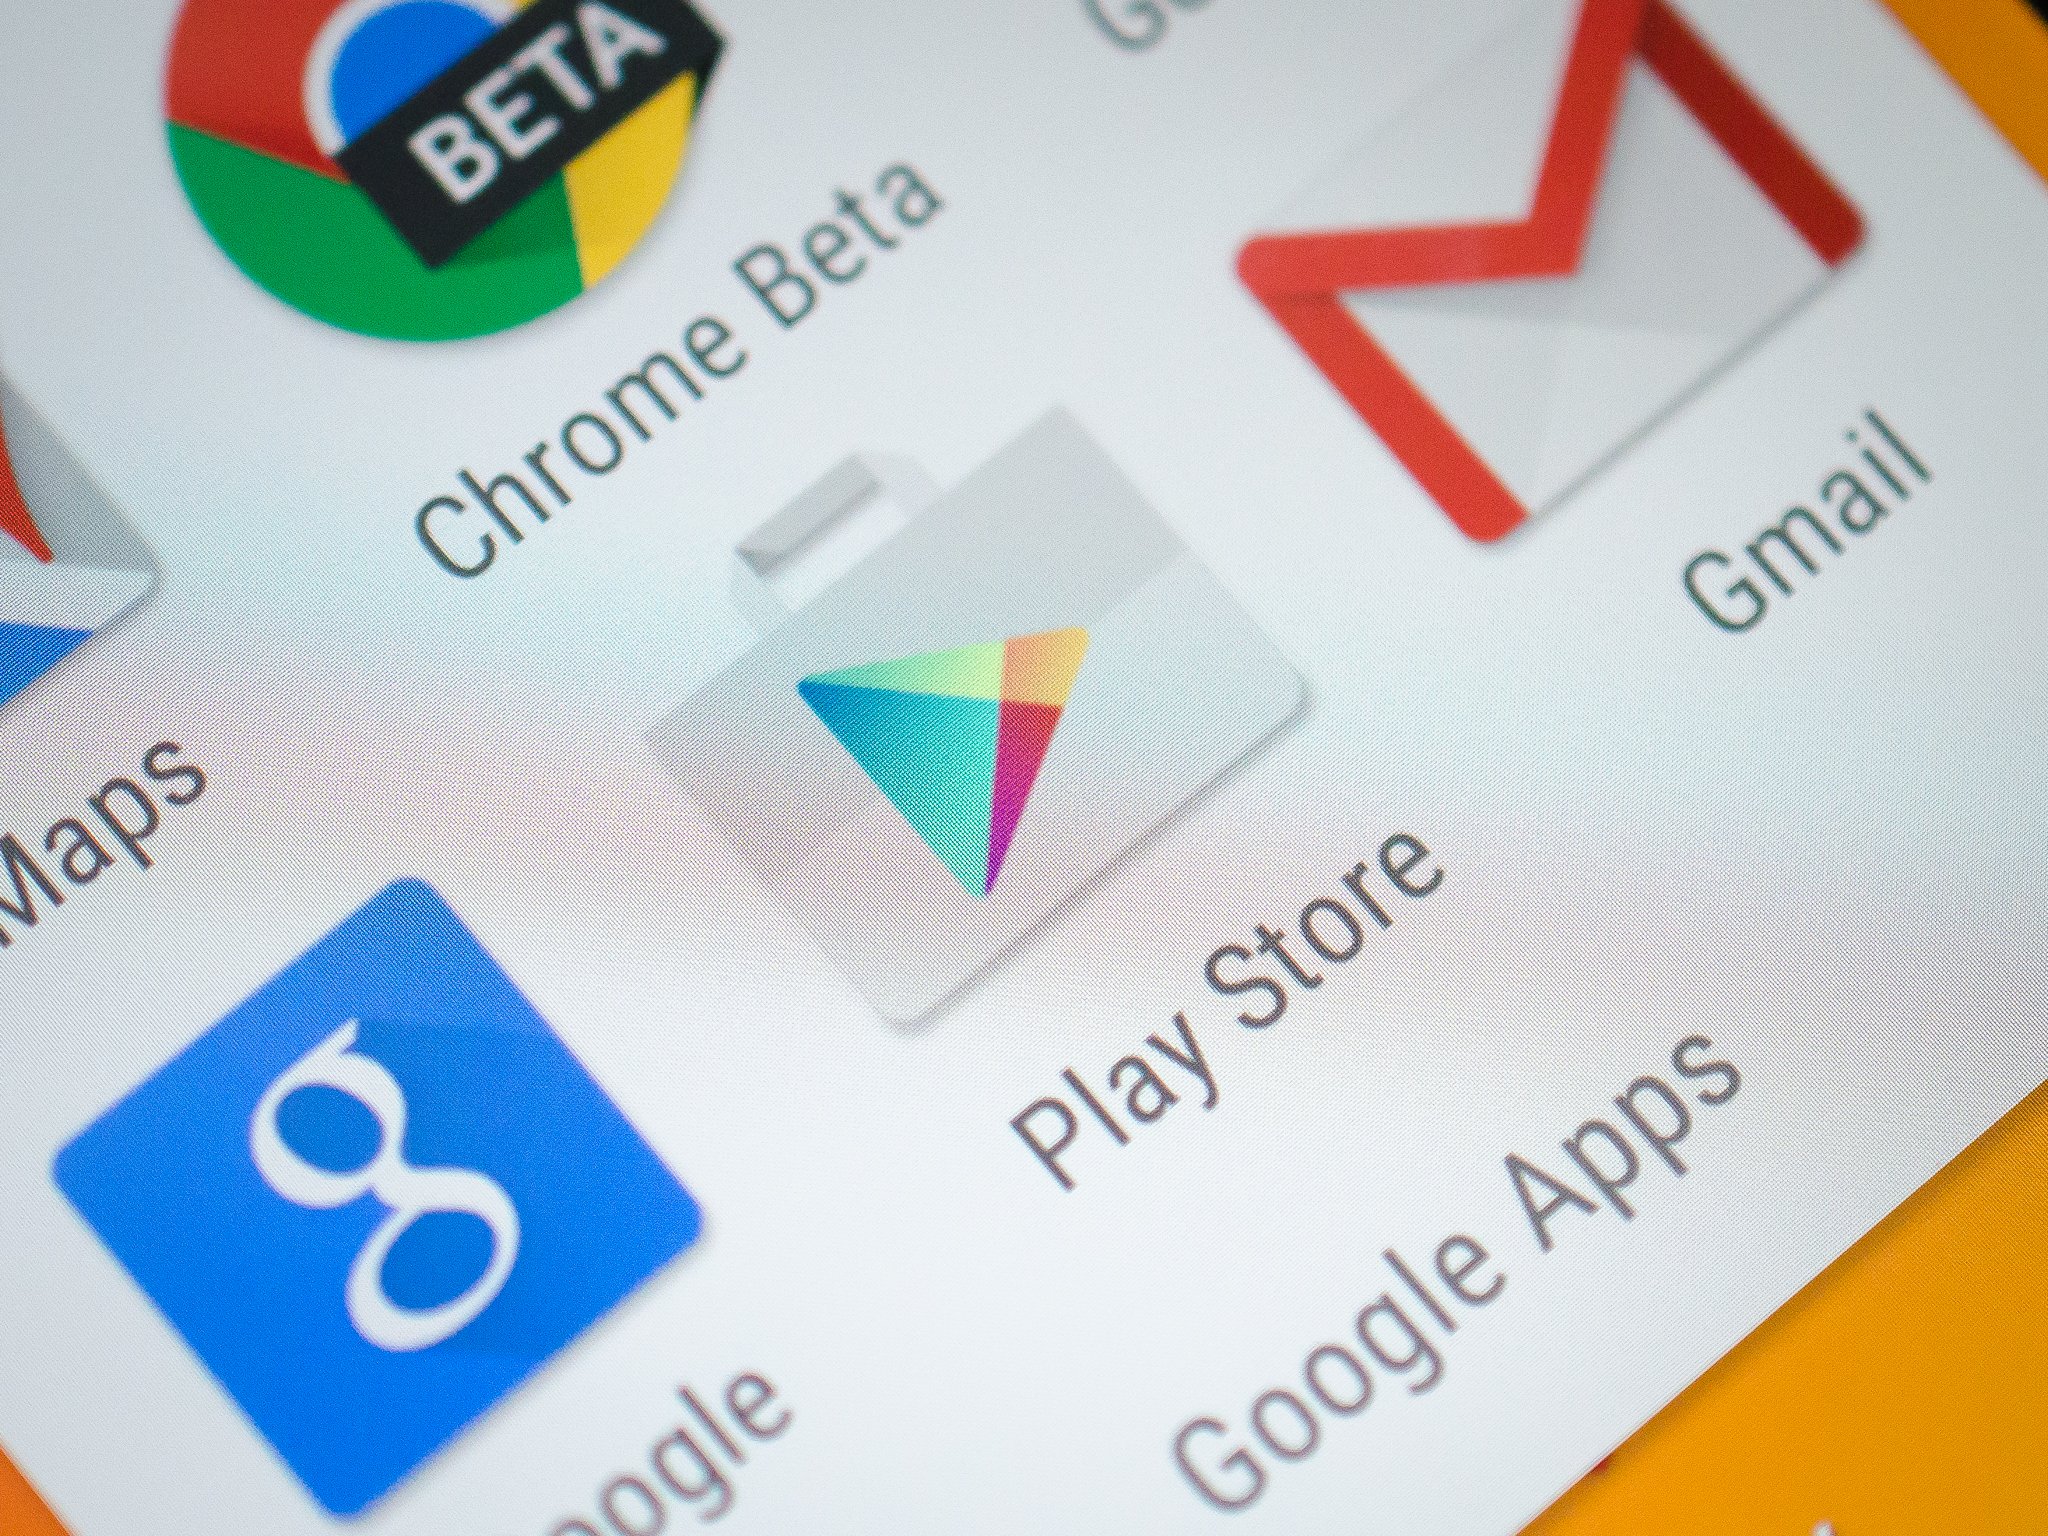 Google expands free Google Play content to Sudan